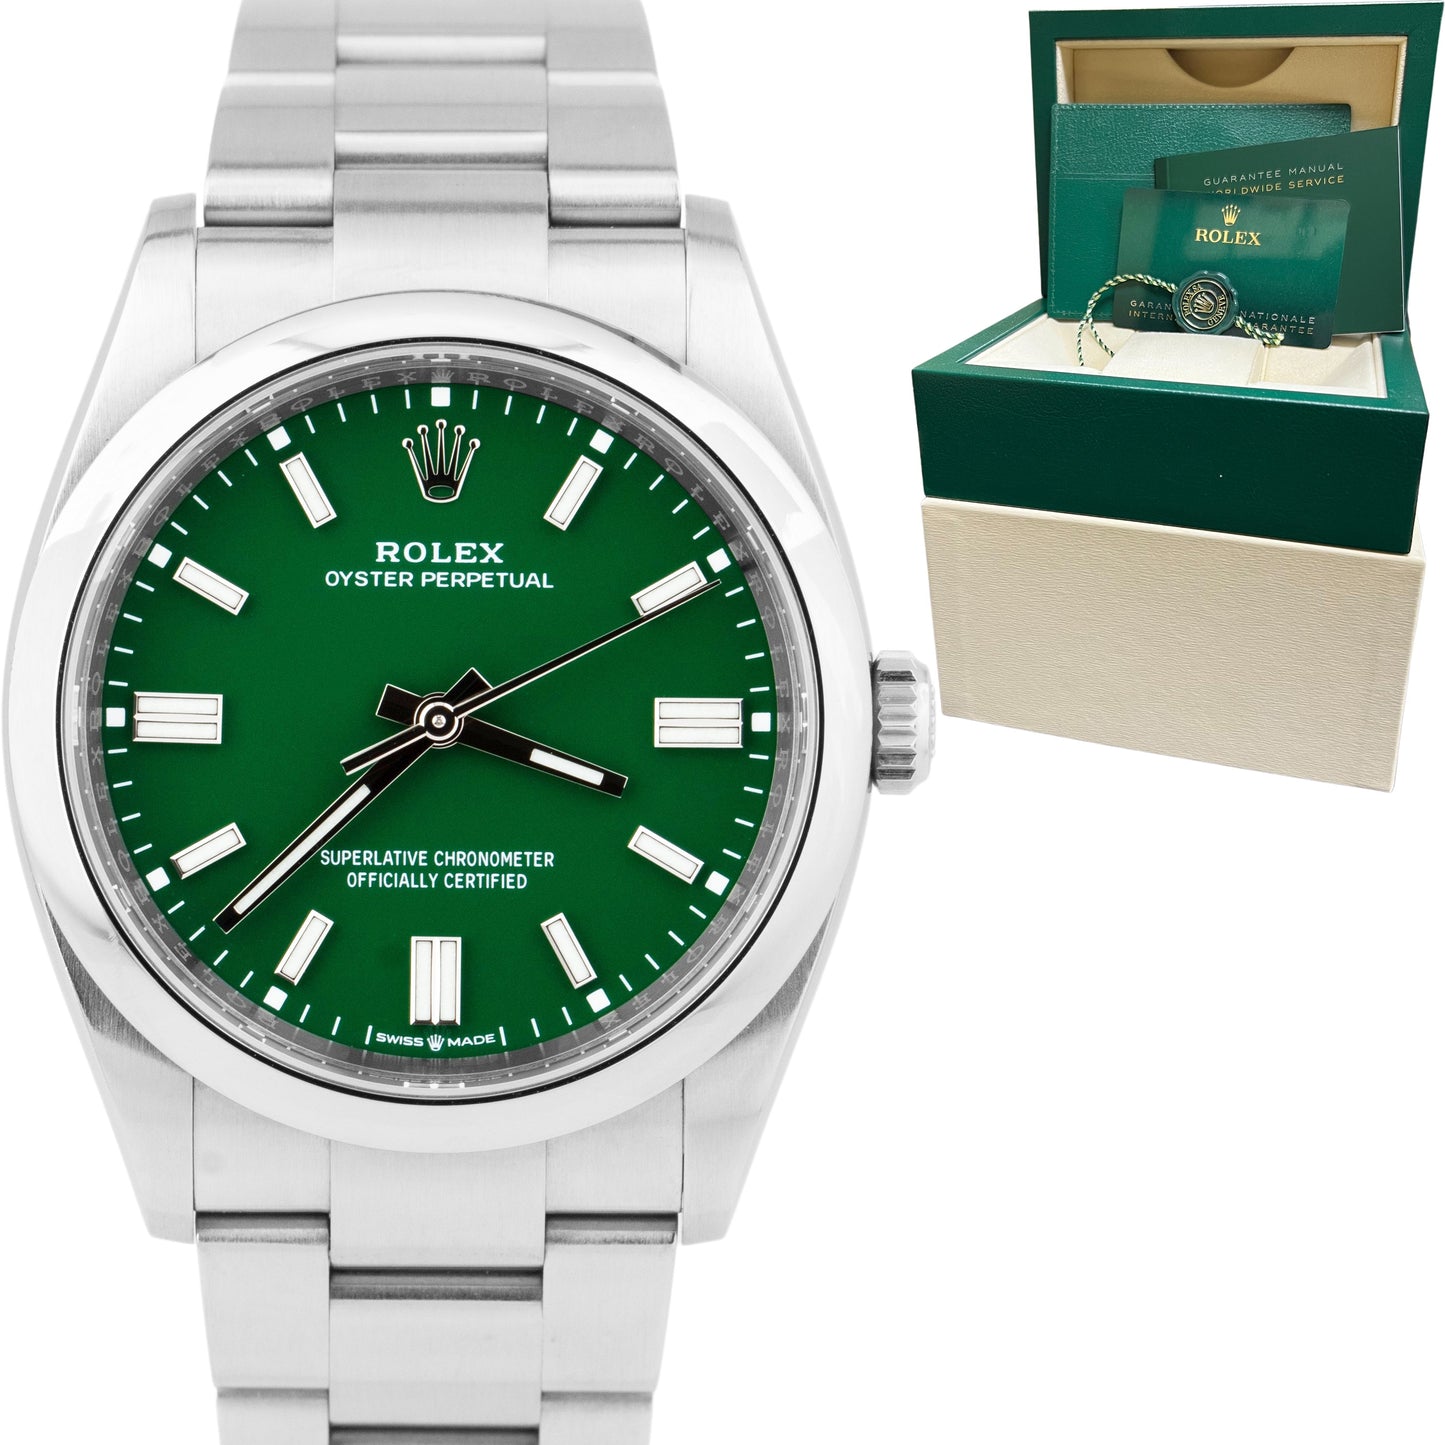 2021 Rolex Oyster Perpetual 36mm Stainless Steel GREEN Watch 126000 BOX CARD